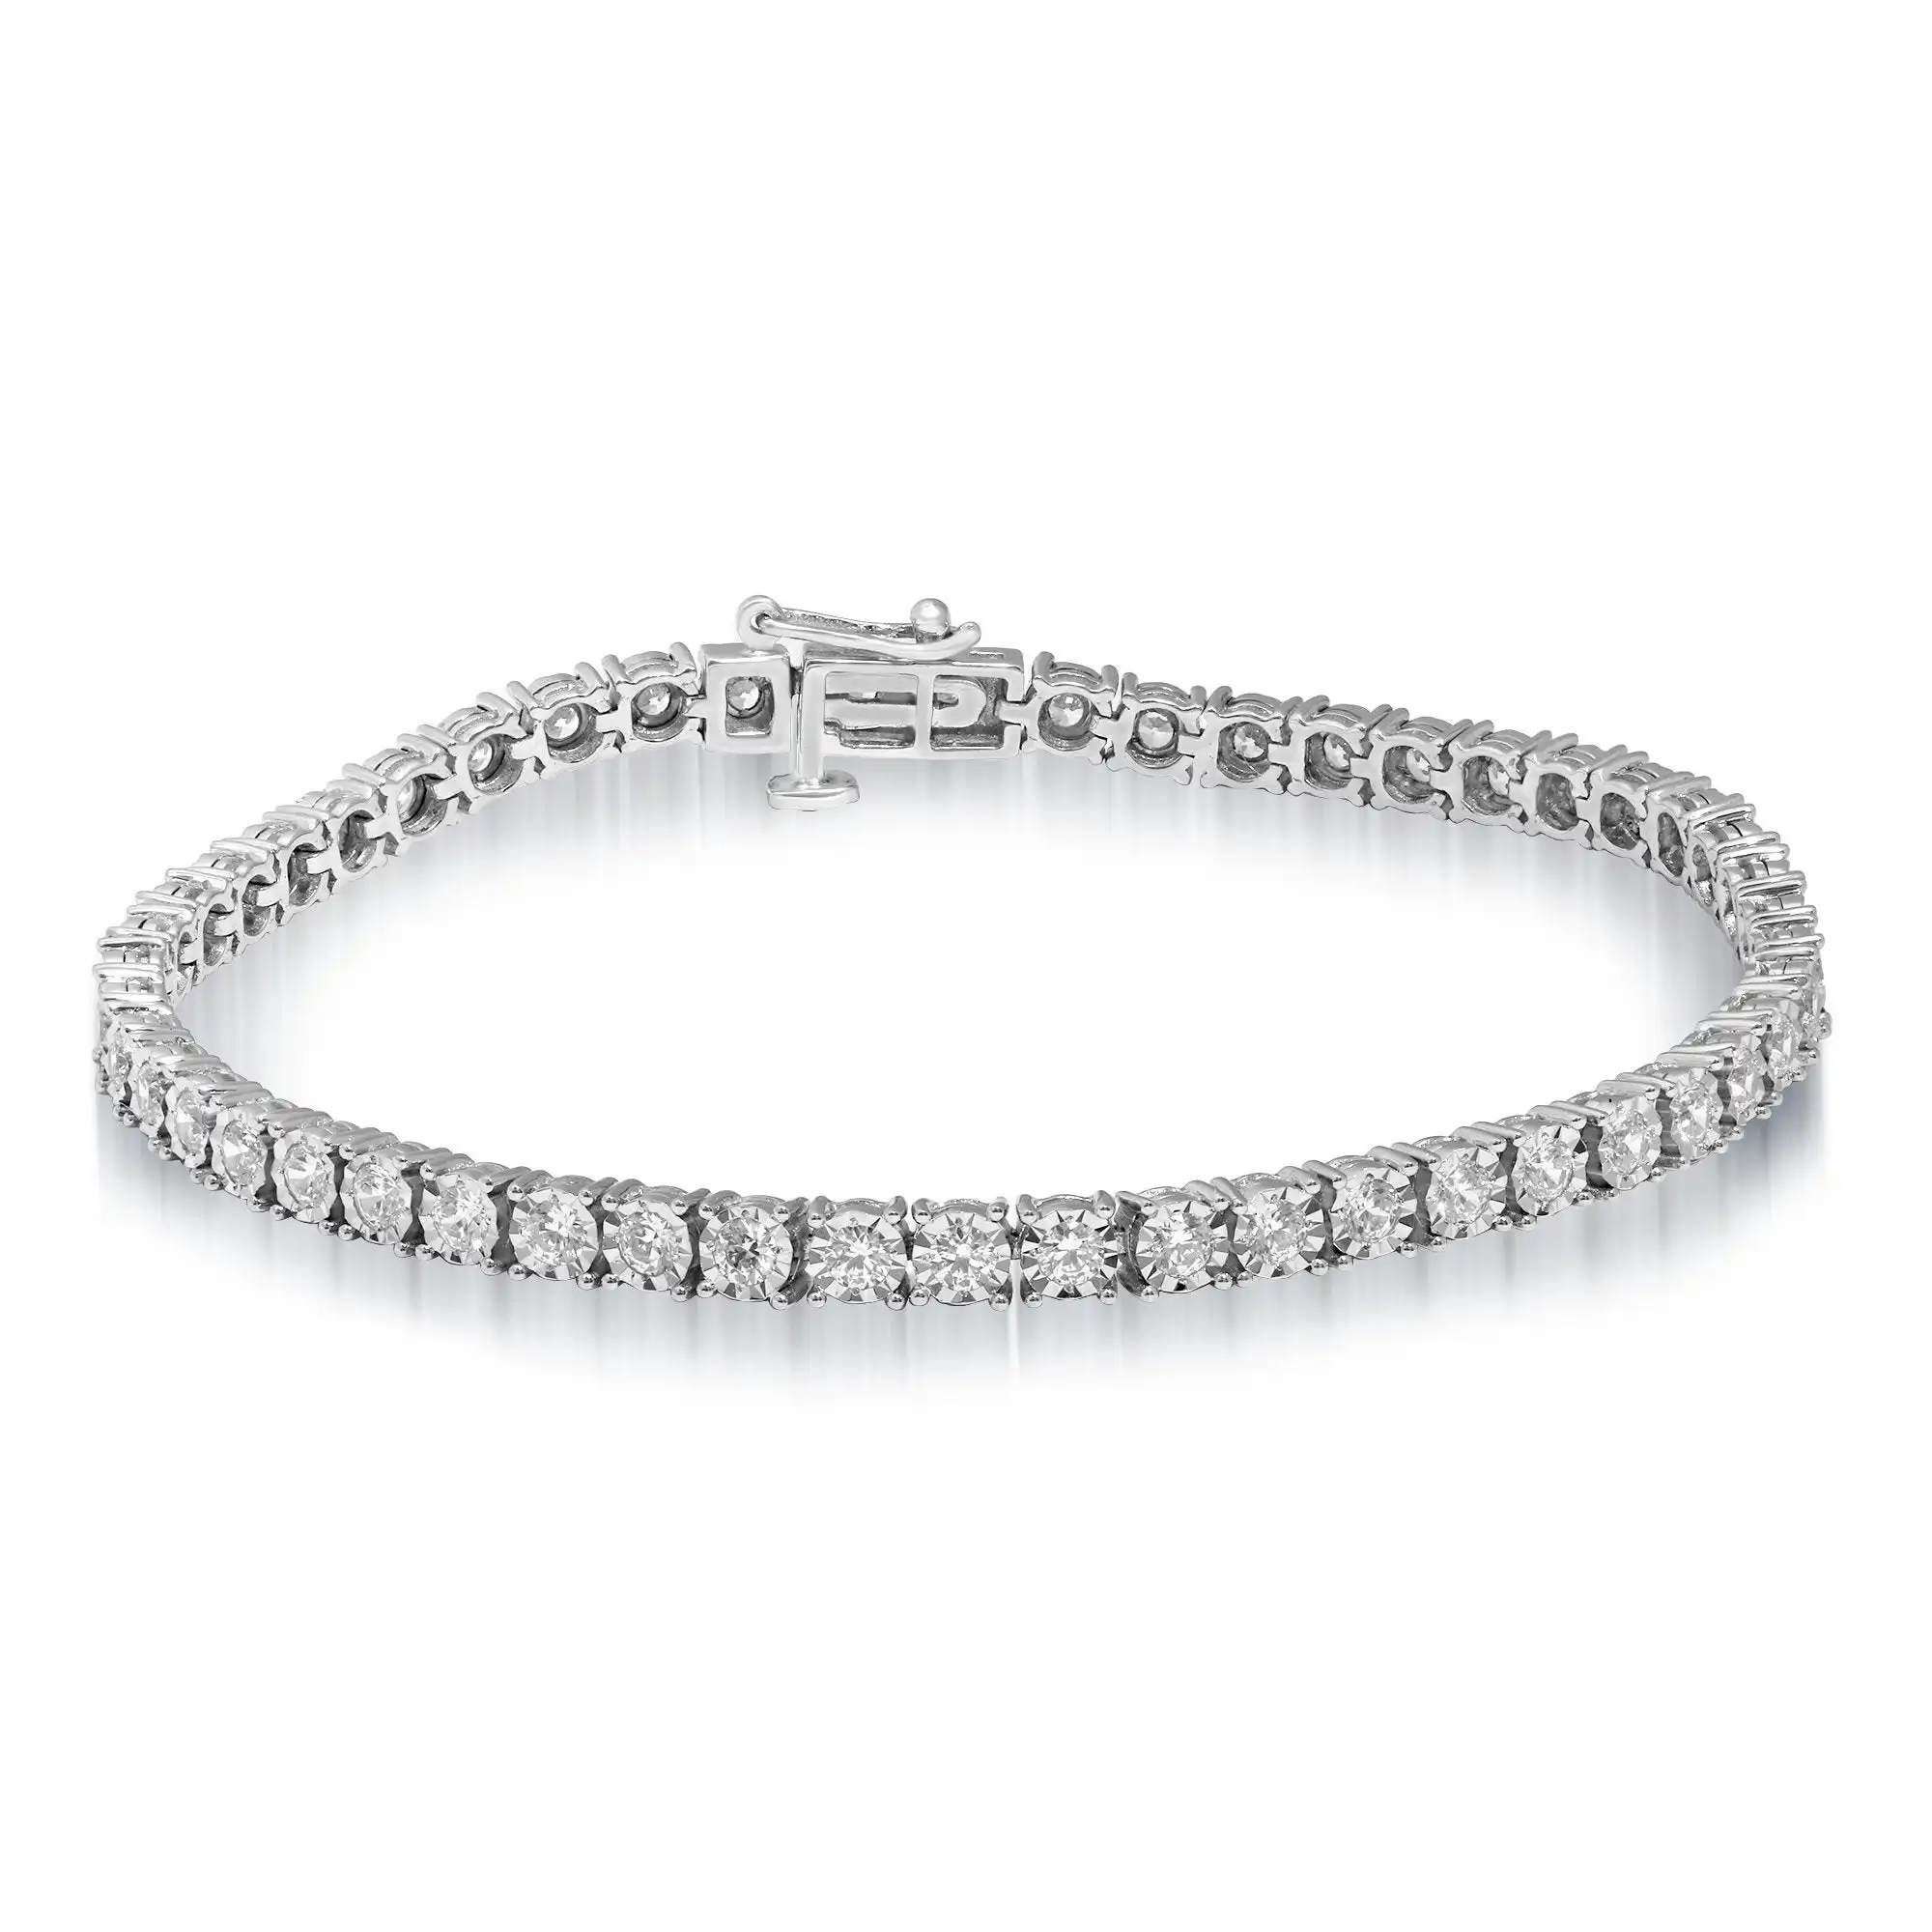 Meera Tennis Bracelet with 3.00ct of Laboratory Grown Diamonds in 9ct White Gold